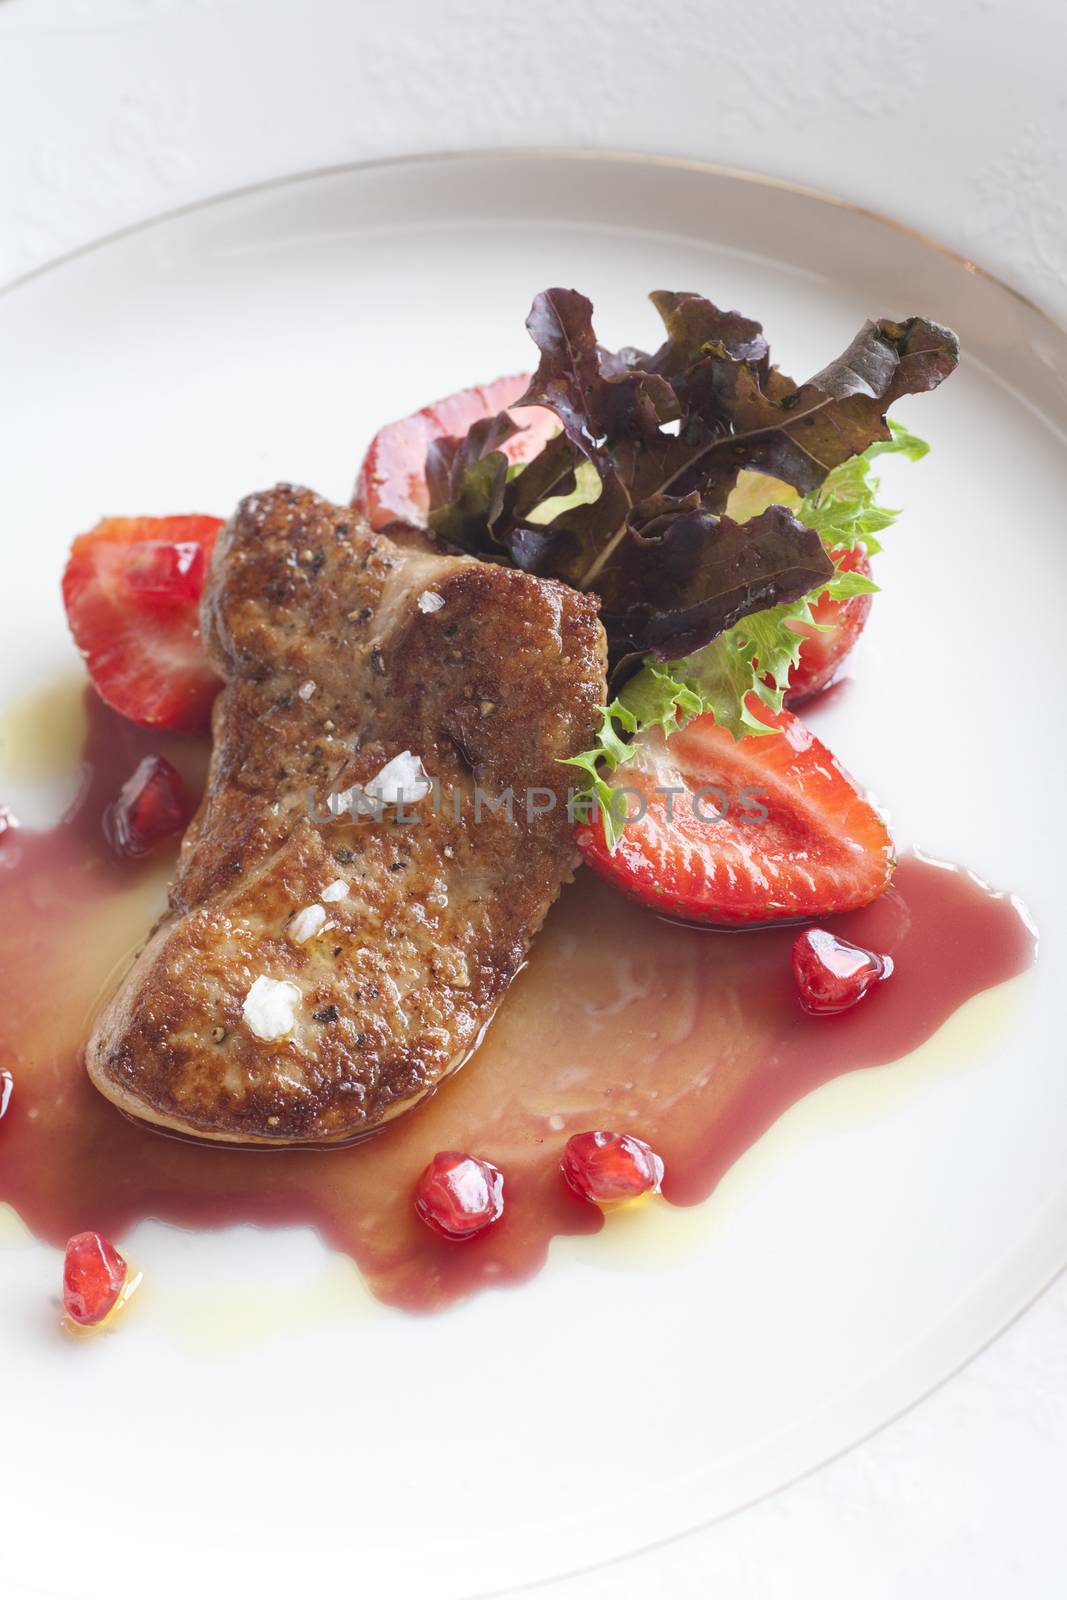 Beef steak with strawberry